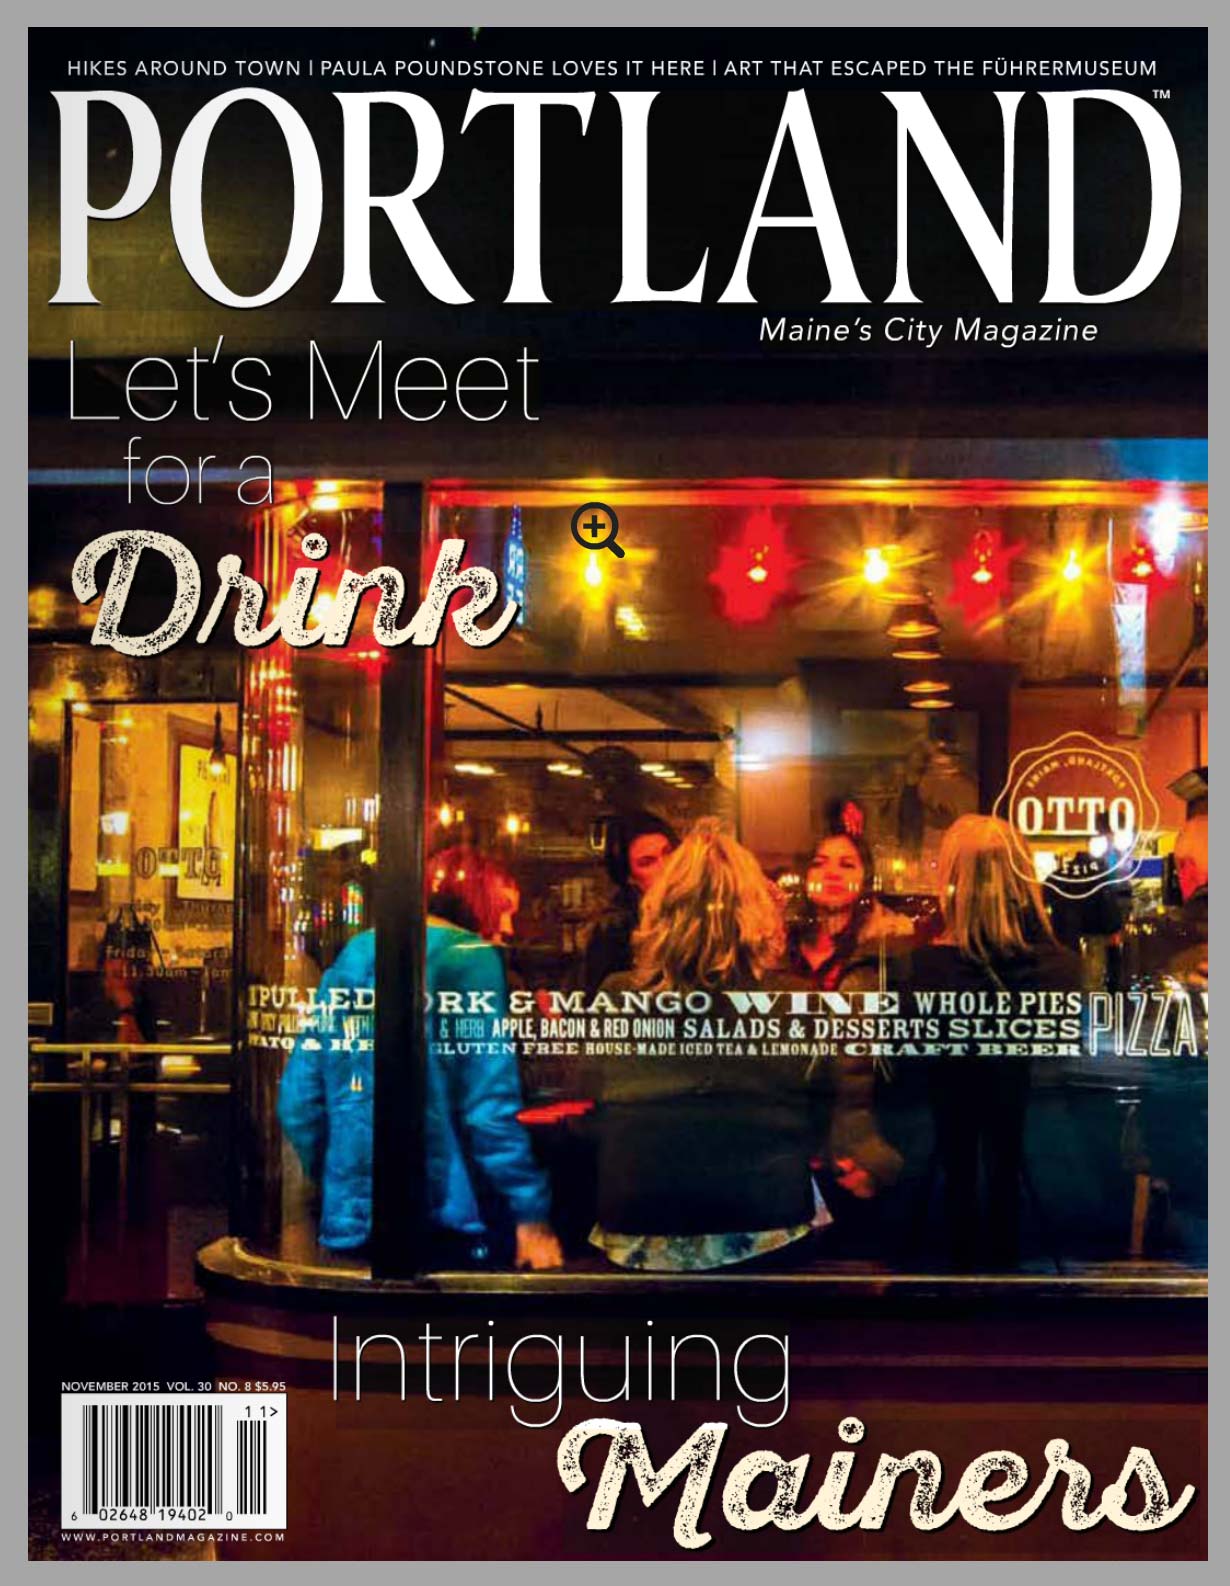 Cover of Portland Magazine with Restaurant Window Scene at Night with Yellow and Red Lights